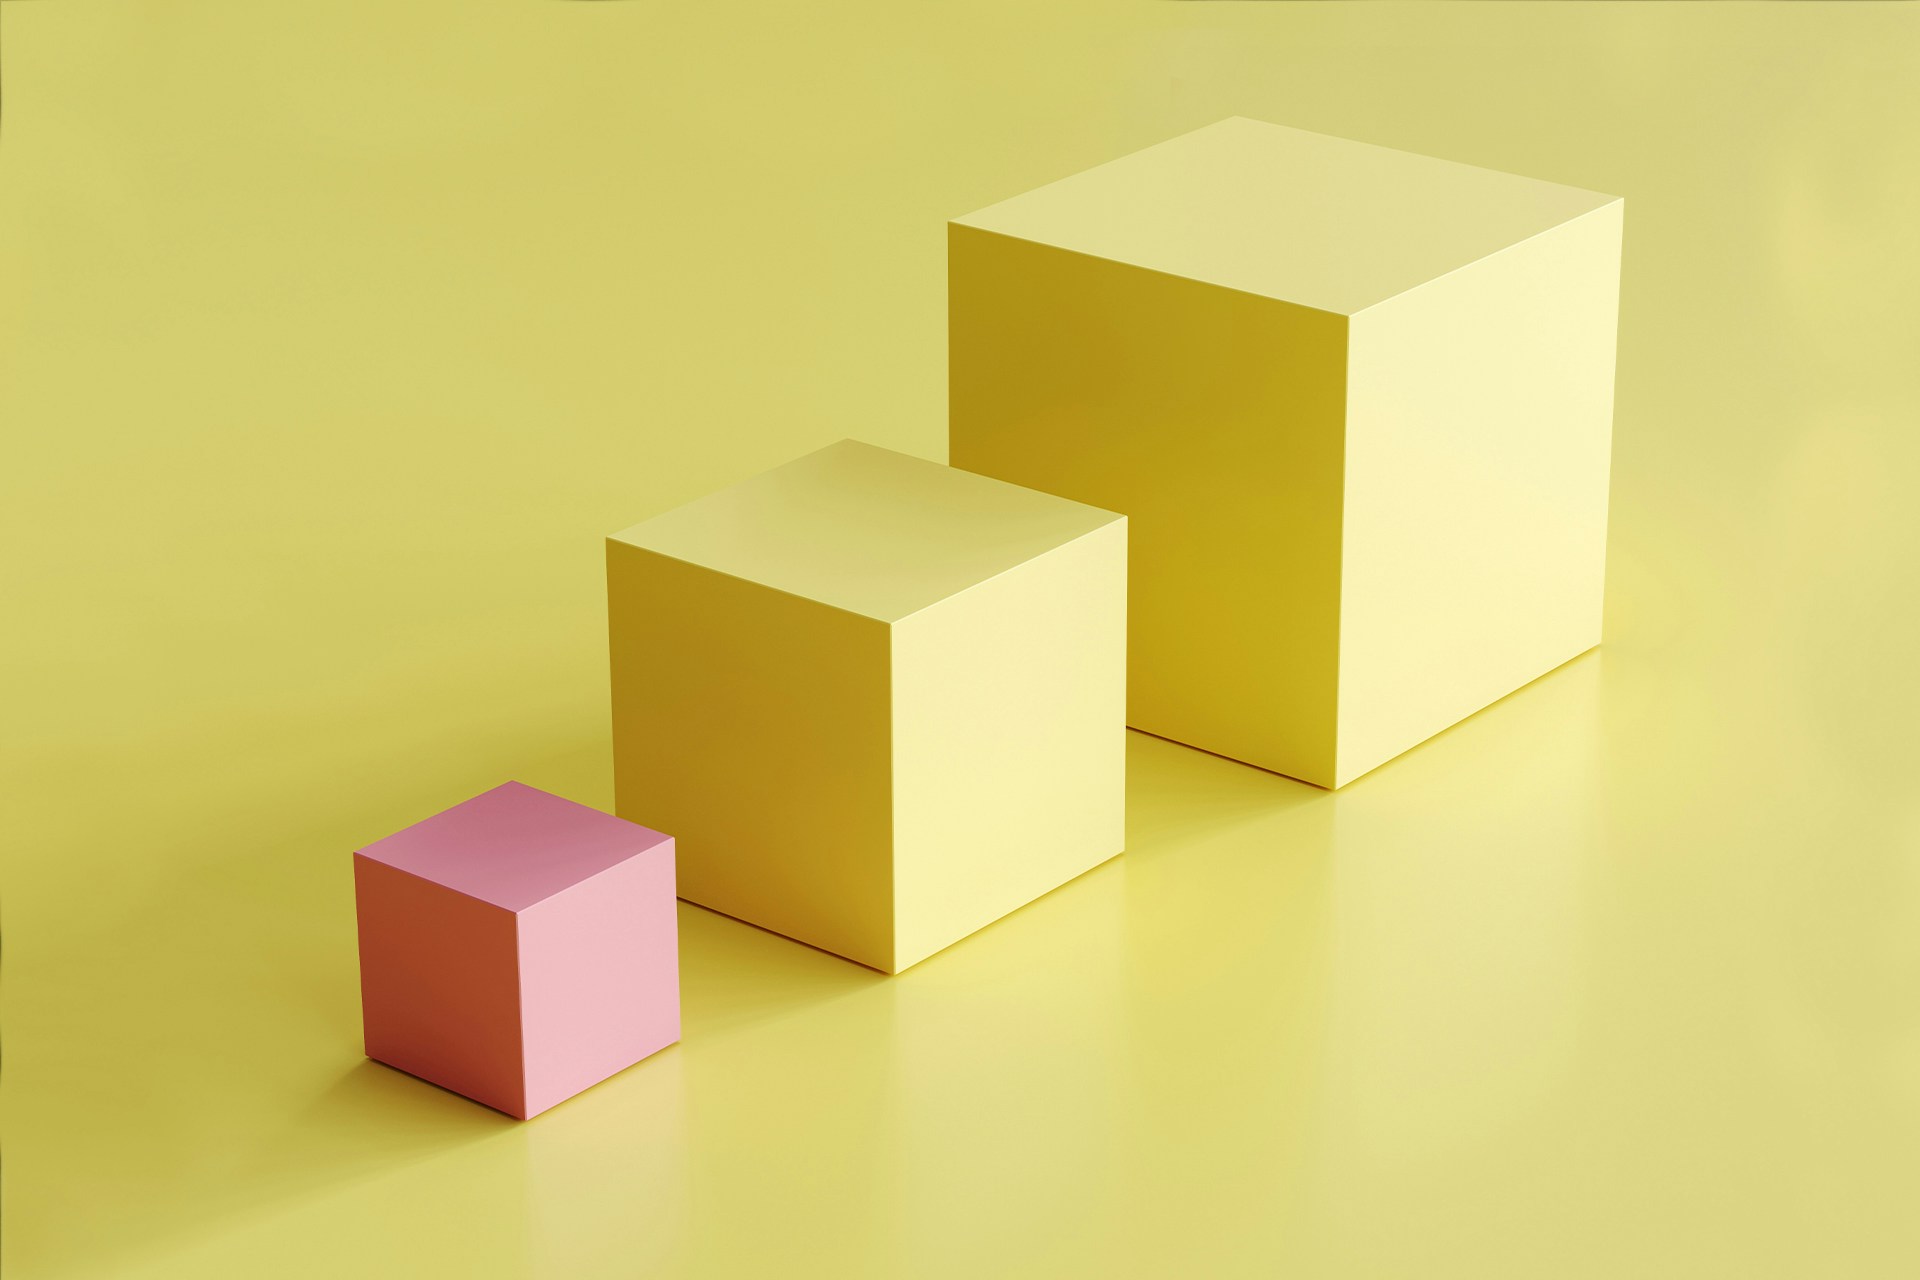 A set of blocks: two large yellow cubes and a smaller pink cube. The pink cube clearly stands out from the other yellow cubes, which makes this image the perfect fit for our blog on brand extensions and how to include them in your strategy.